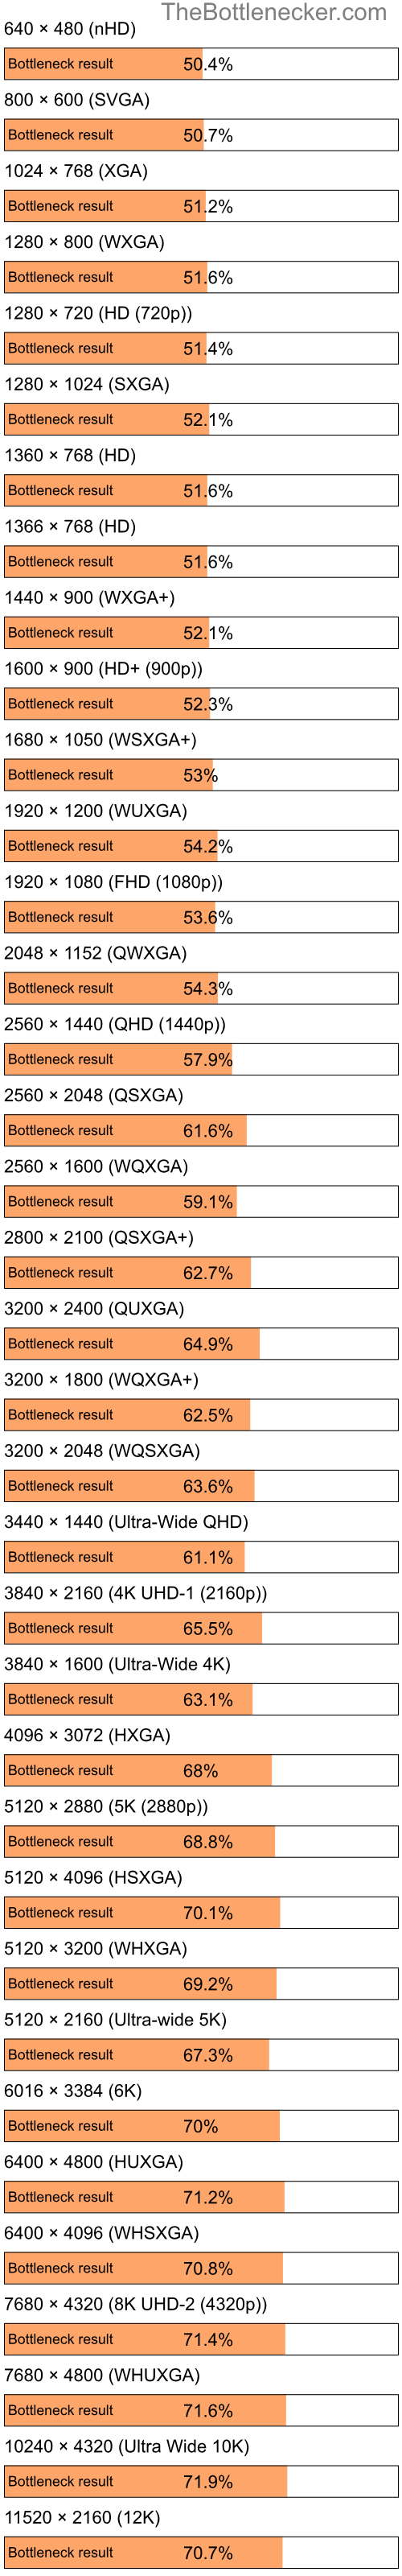 Bottleneck results by resolution for Intel Pentium 4 and NVIDIA Quadro NVS 295 in Processor Intense Tasks